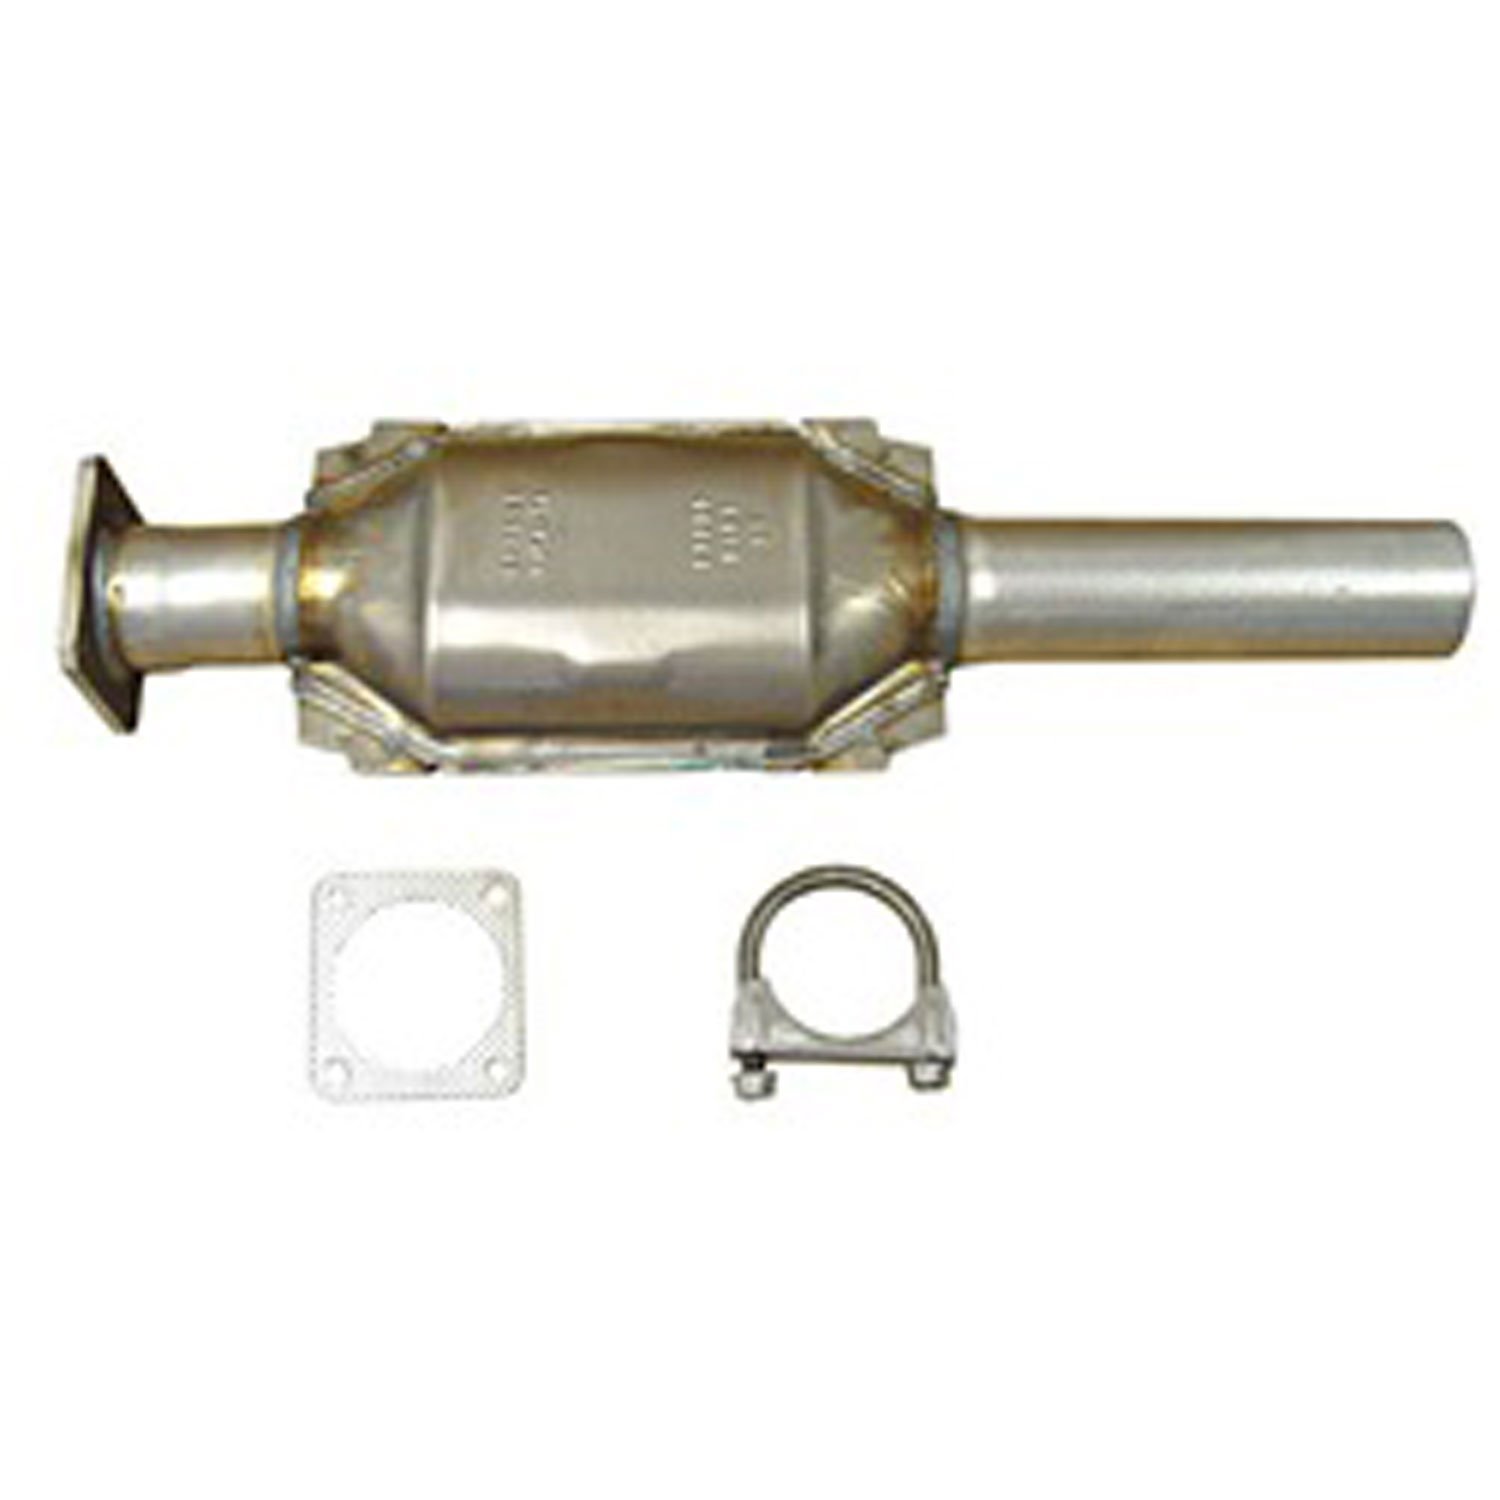 Replacement catalytic converter from Omix-ADA, Fits 87-92 Jeep Wrangler YJ with a 2.5 liter engi